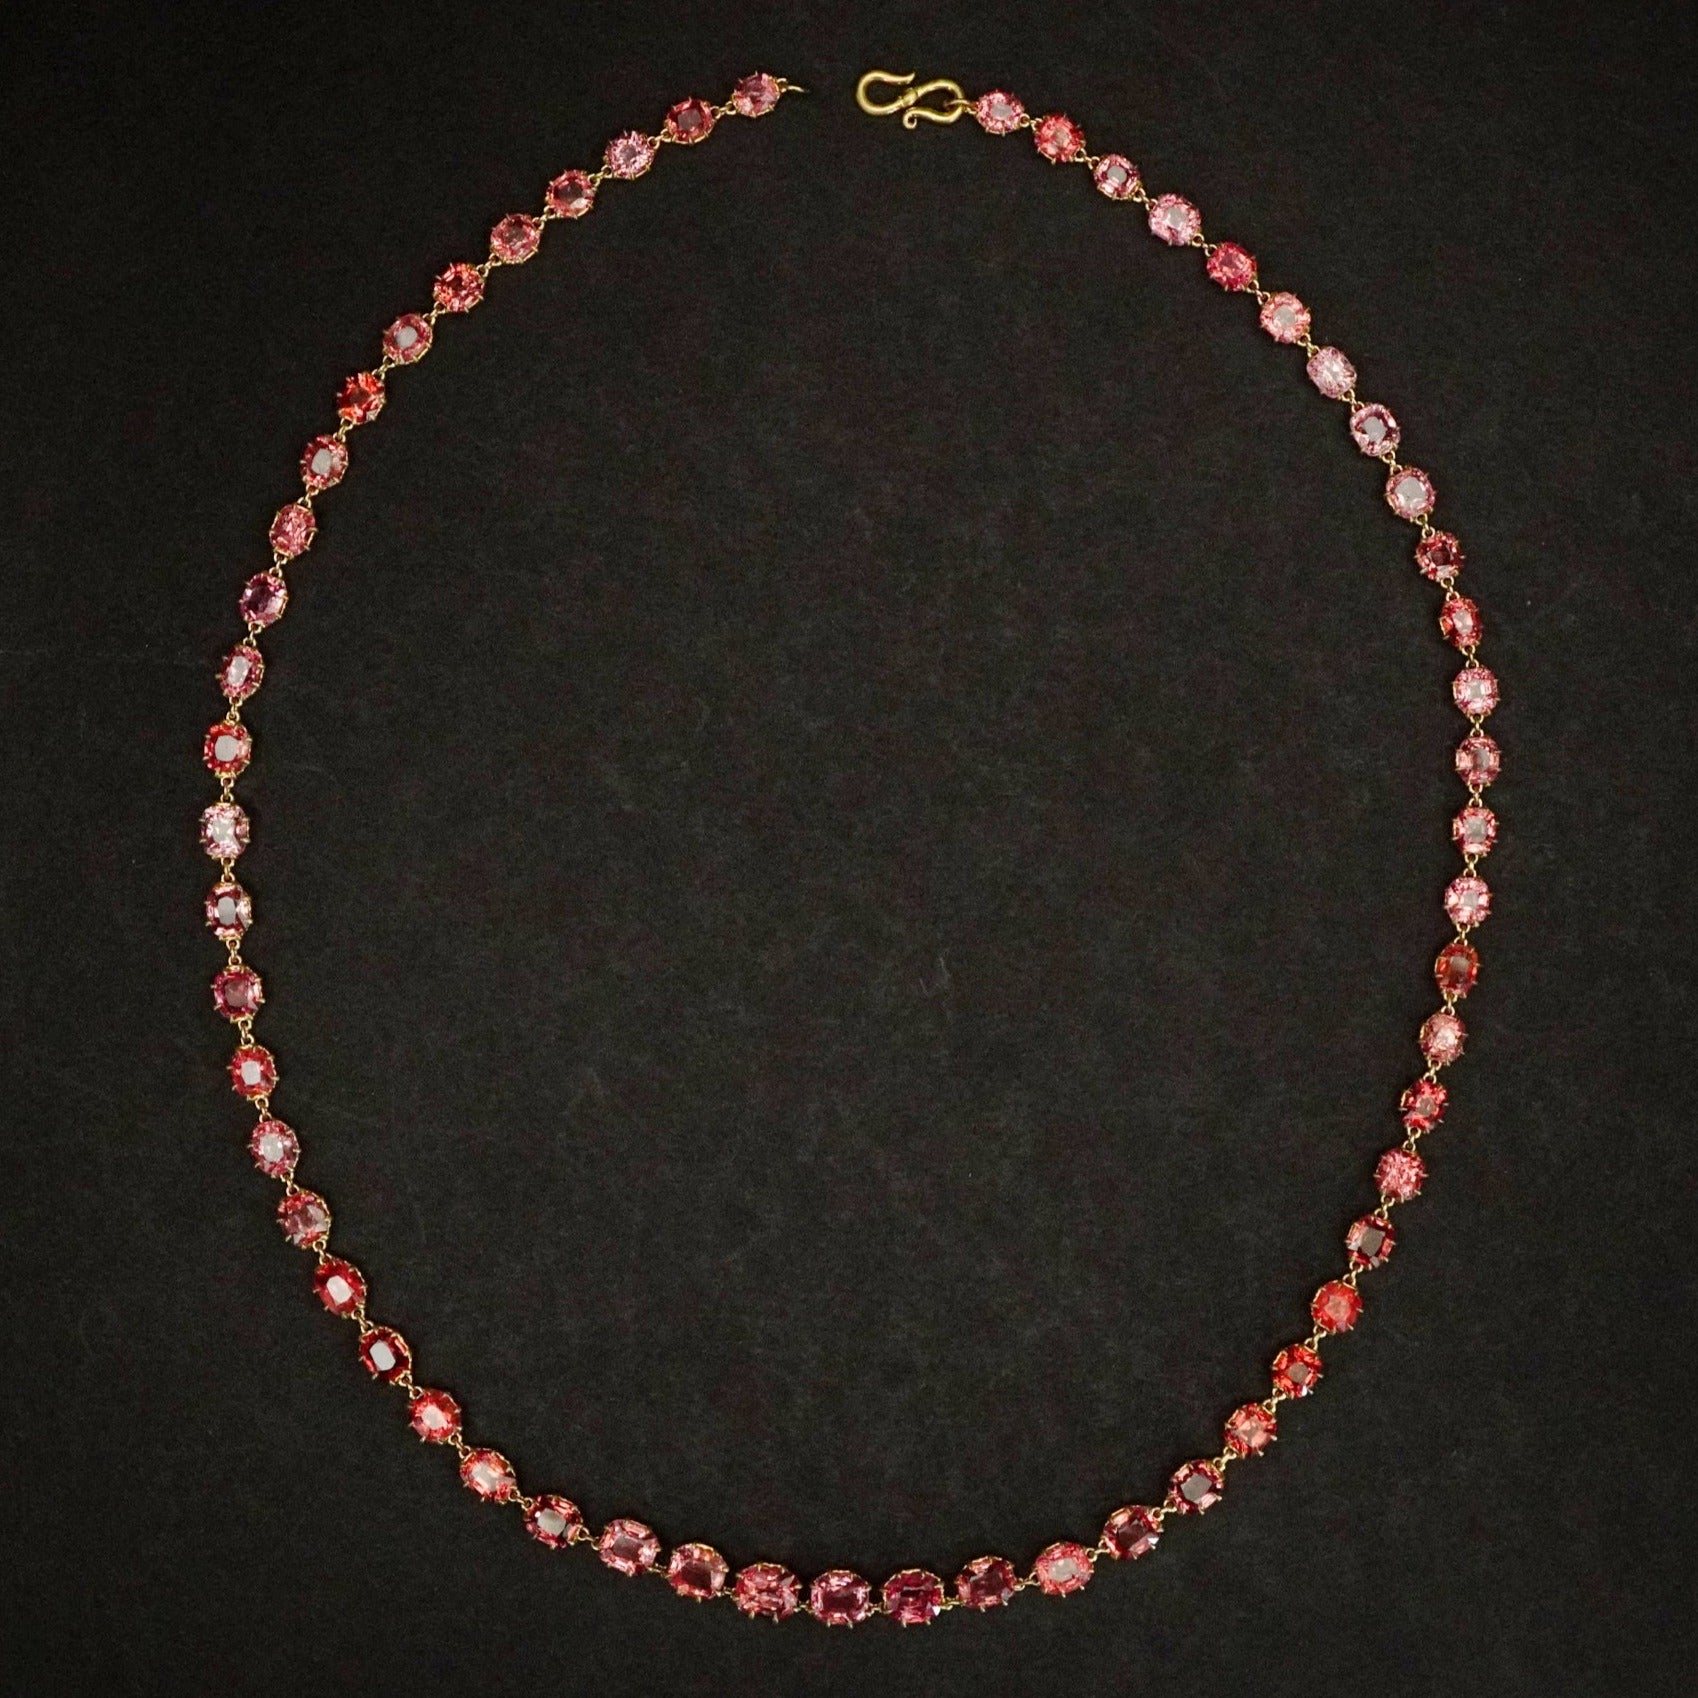 71.5-CT Pink and Orange Spinel Gold Necklace